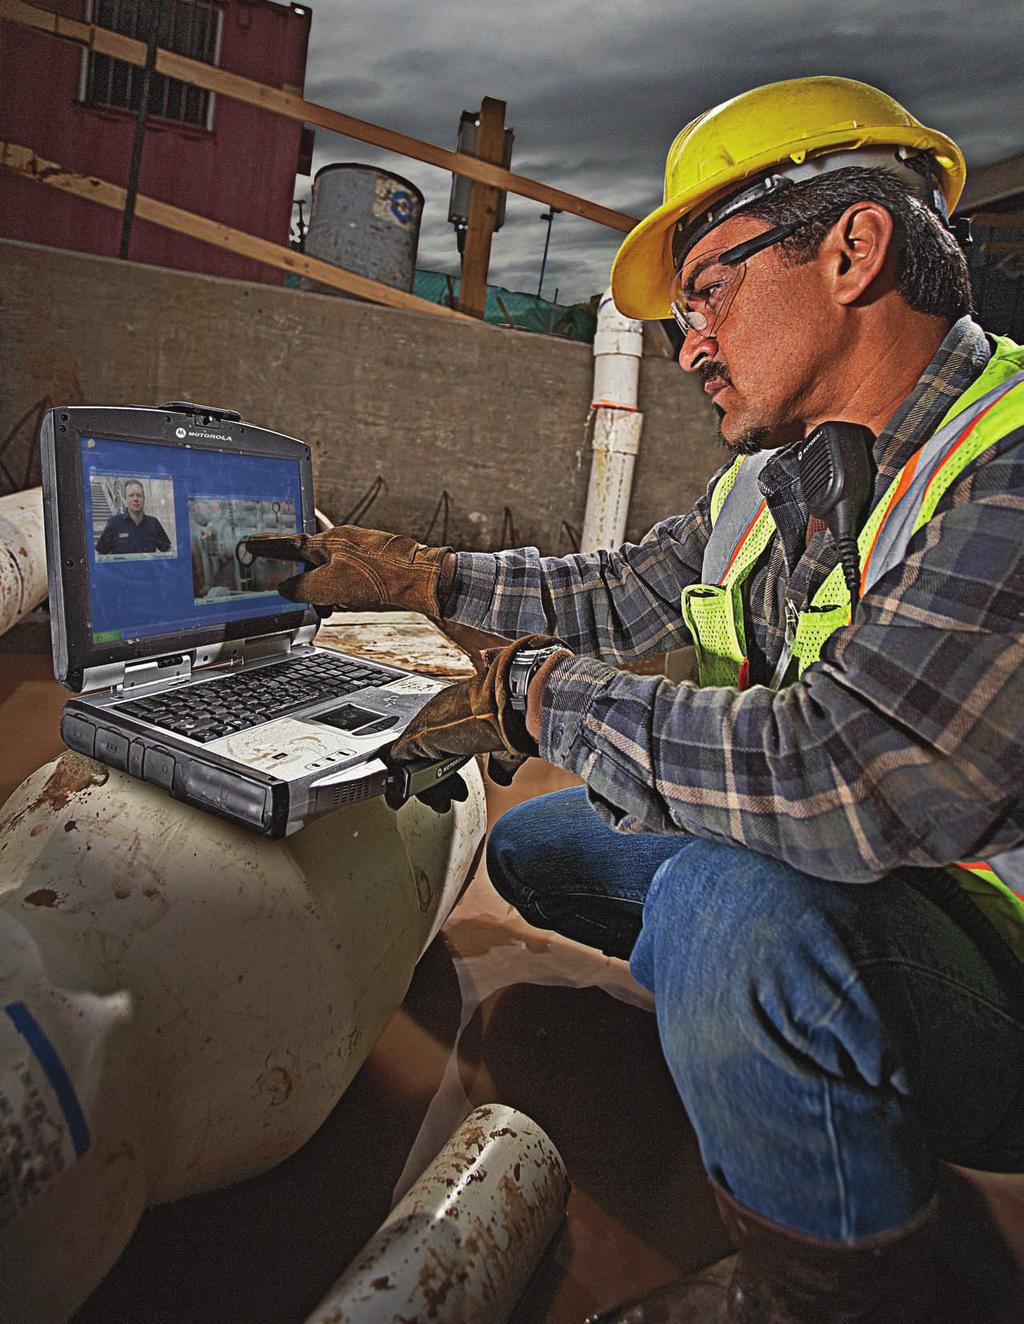 Designed for the toughest environments, the ML910 Rugged Notebook will keep